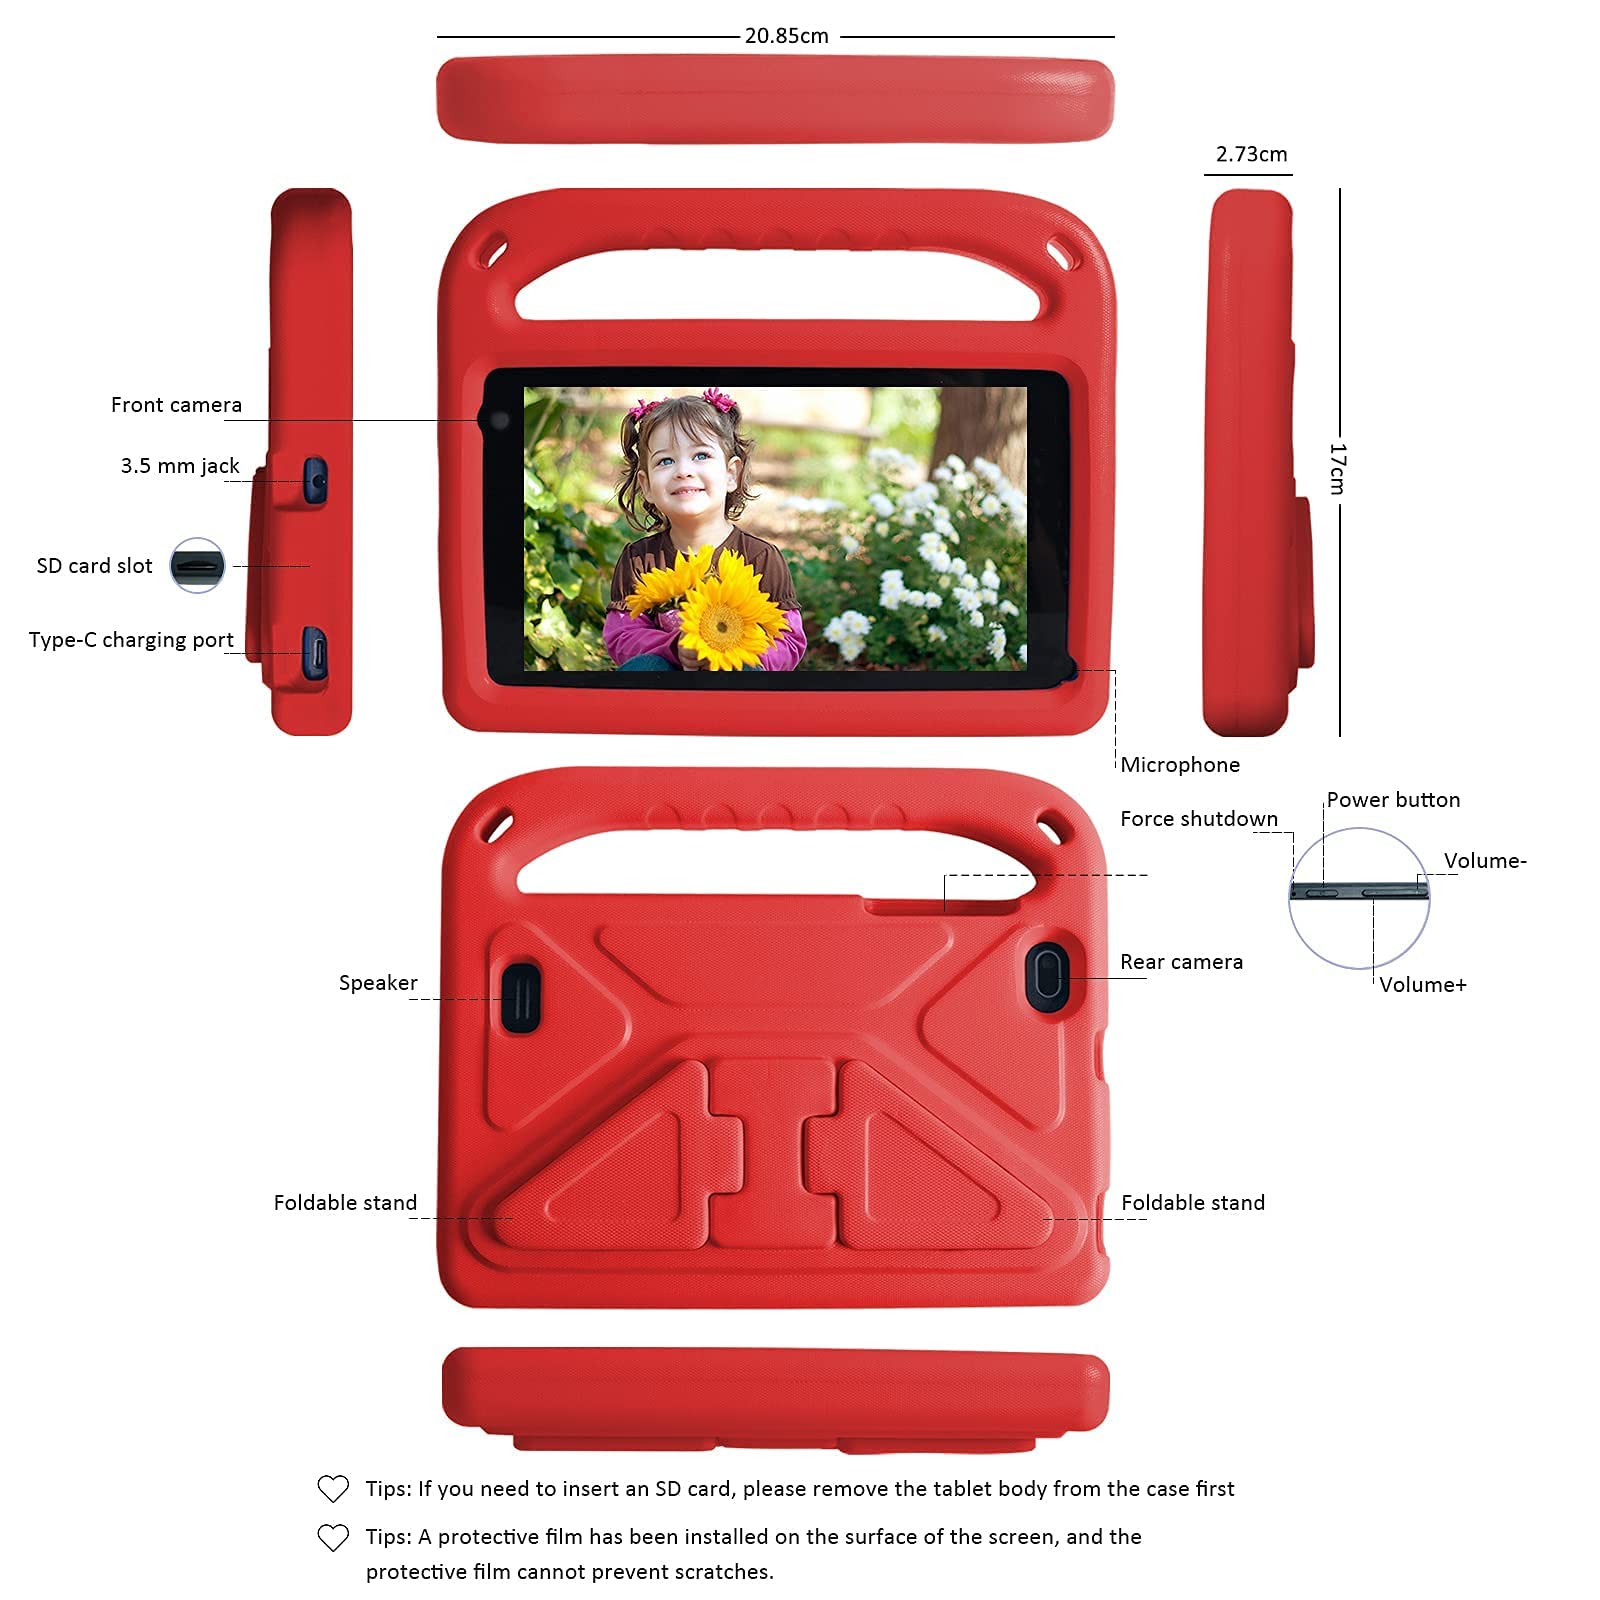 2024 Kids Tablet for Kids Android Tablet 7 inch 128GB Extended Memory, Google Play Installed Parental Control Mode Puzzle Game IPS HD Display, Toddler Tablet with Shock-Proof Case, Red